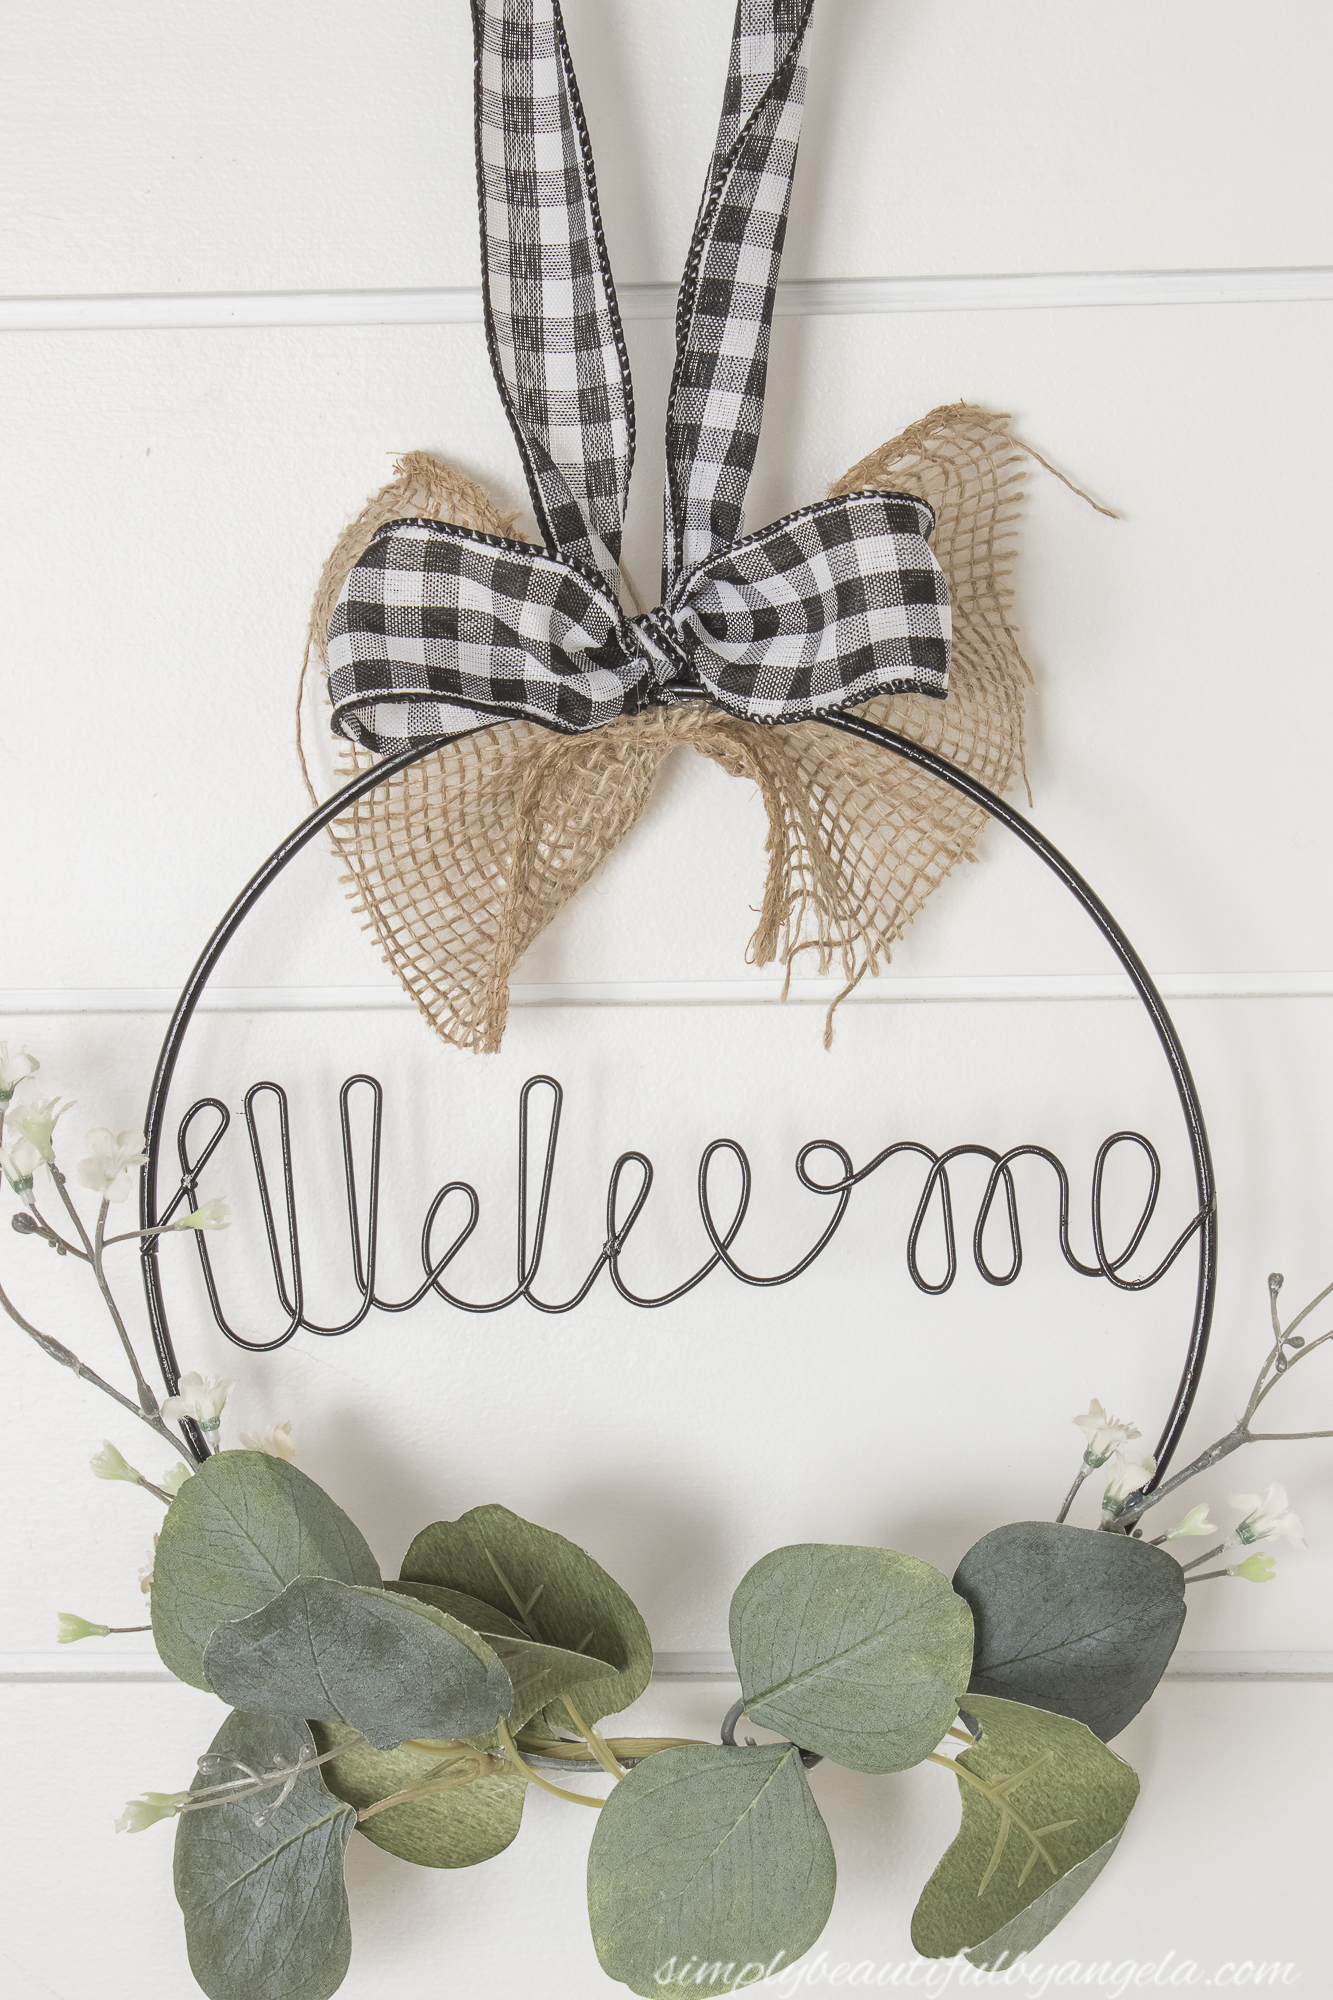 Easy Dollar Tree Crafts for Spring